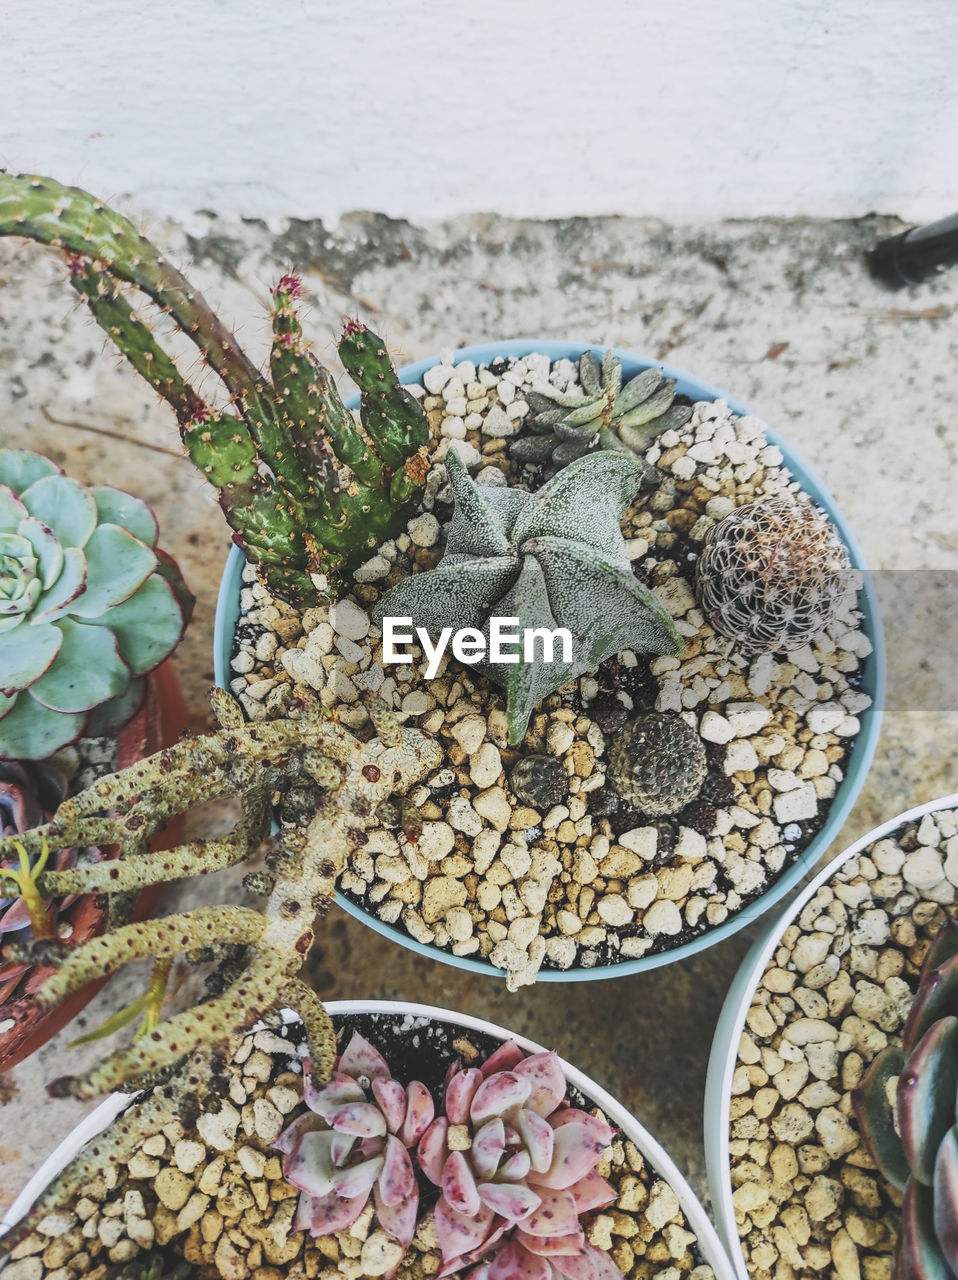 HIGH ANGLE VIEW OF SUCCULENT PLANT ON STONES